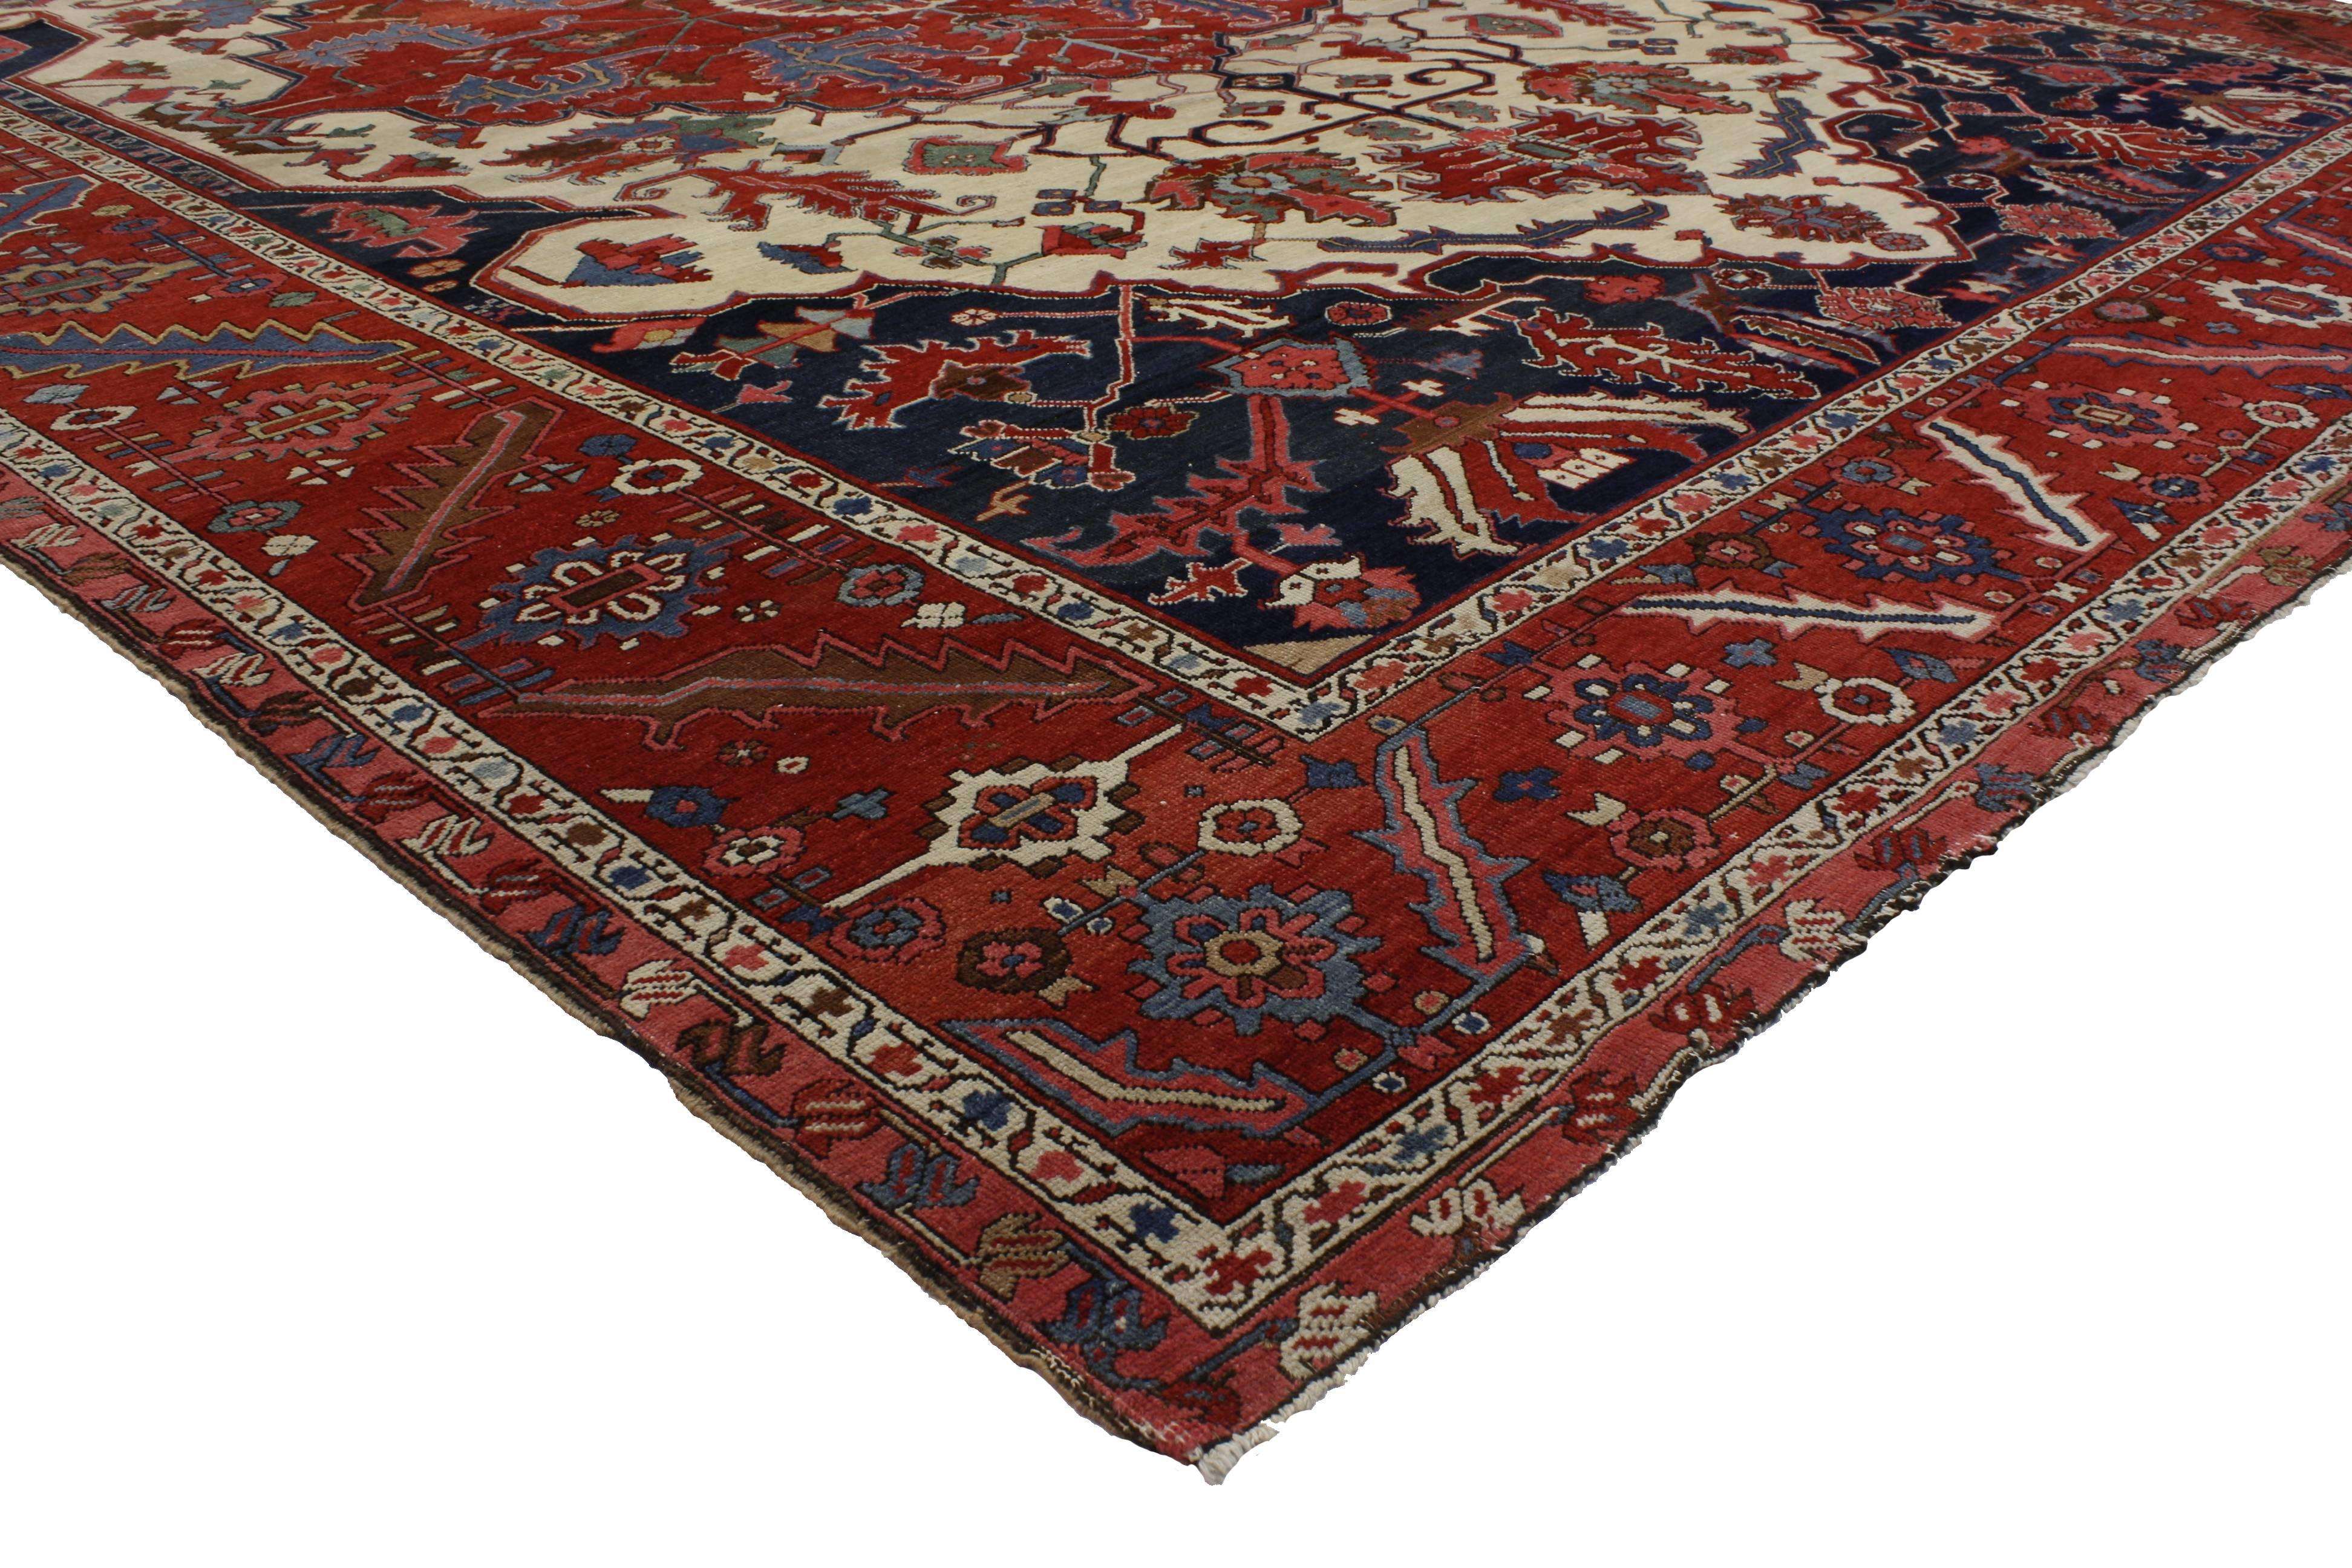 76849 Antique Persian Serapi Rug with Modern English Tudor Style 11'07 x 15'04. With its architectural design elements and striking appeal combined with a bold refined color palette, this hand knotted wool Tudor style antique Persian Serapi rug can